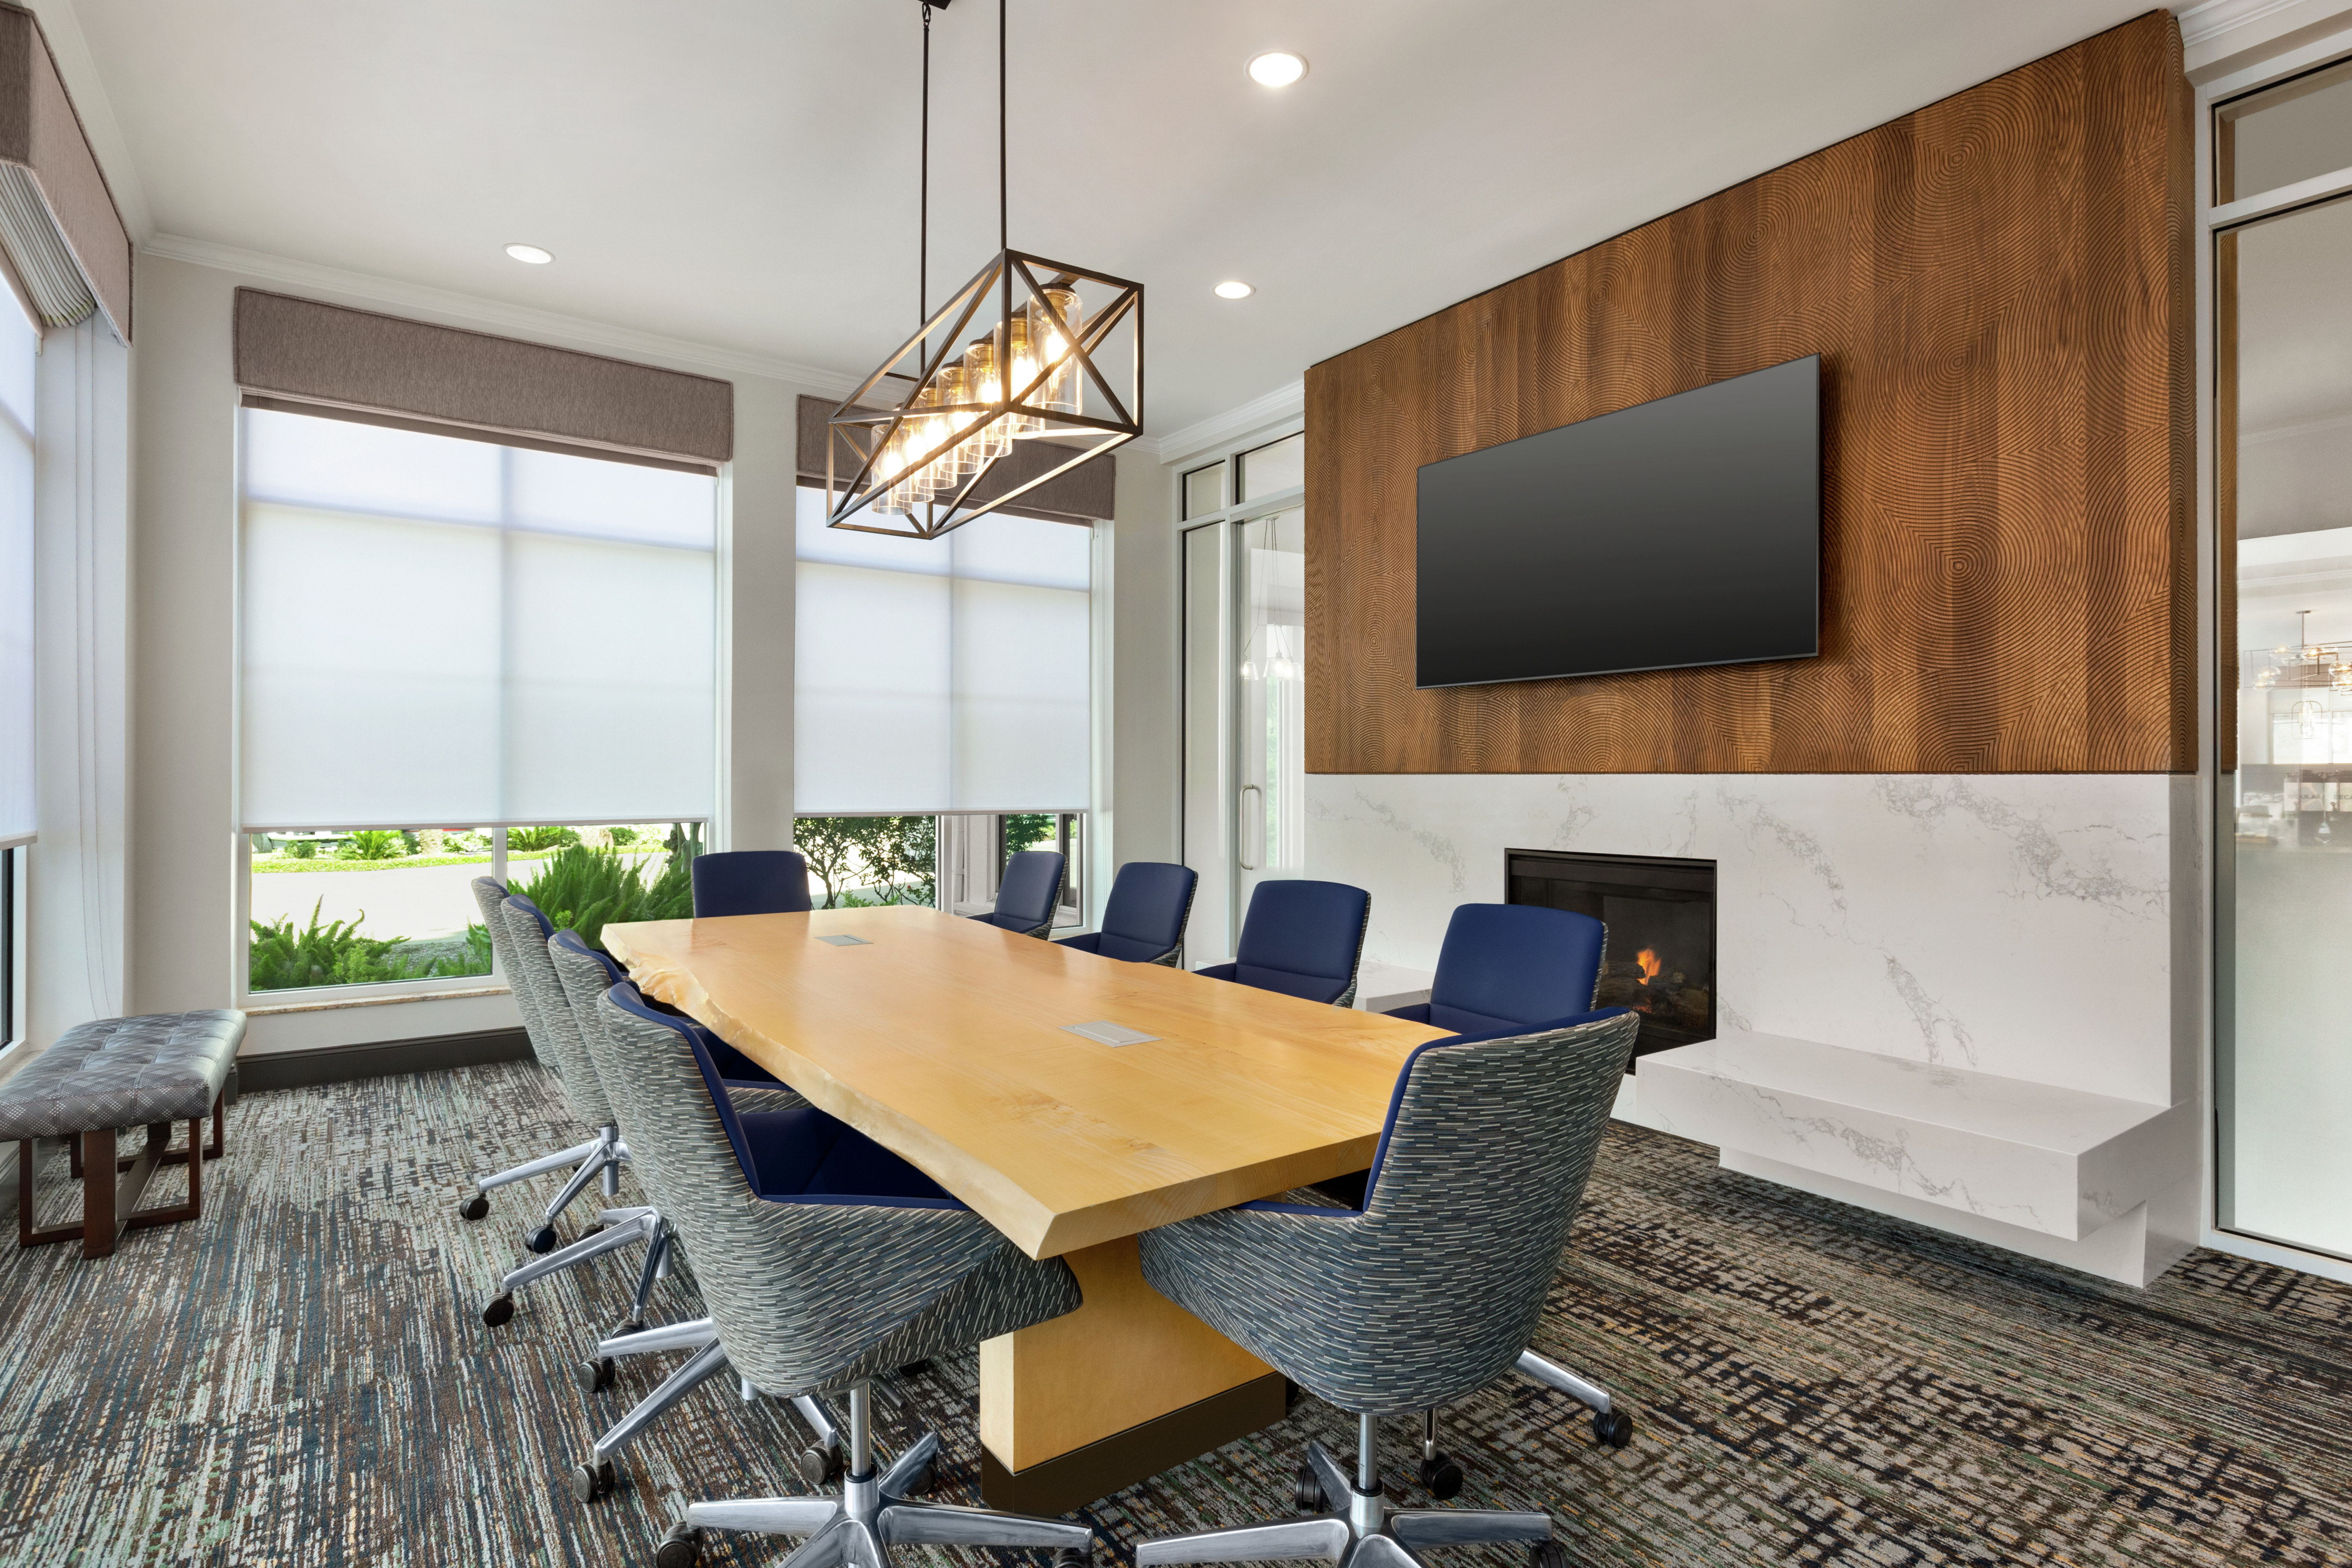 Spacious meeting room with large boardroom table, fireplace, and TV.